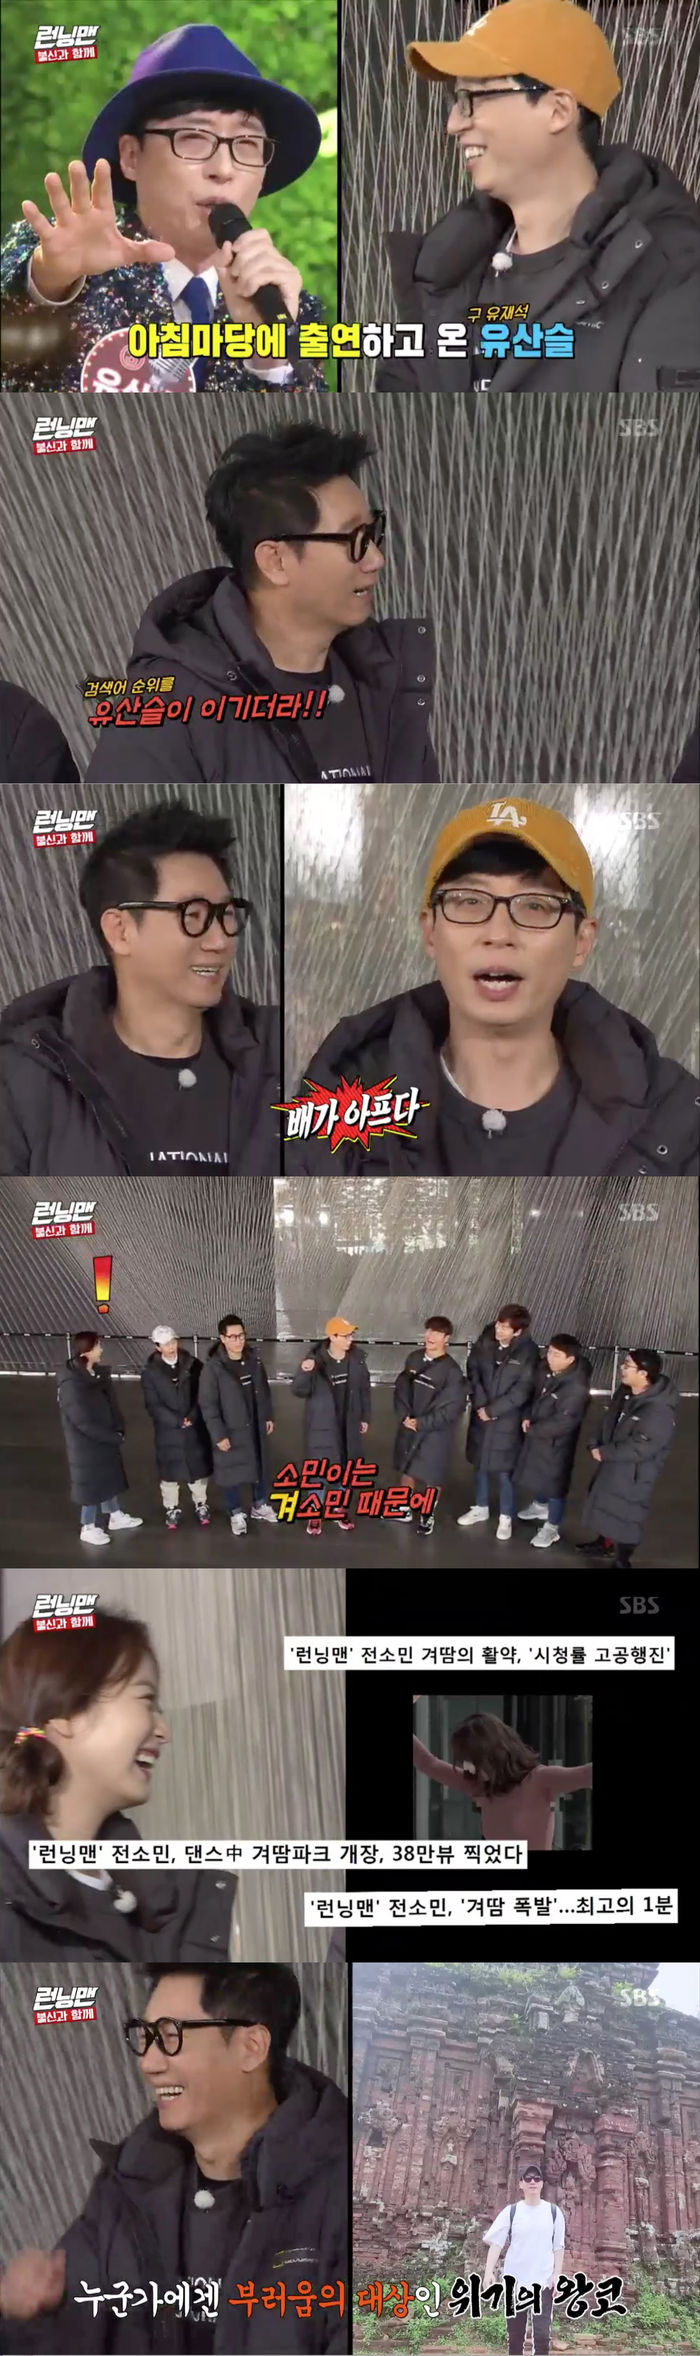 Ji Suk-jin reveals jealousy for Yoo Jae-Suk and Jeon So-minOn SBS Running Man broadcasted on the 1st, I had a recent talk before Race.On the day of the broadcast, Ji Suk-jin asked, Have you seen AM Plaza today?Earlier, Yoo Jae-Suk appeared on AM Plaza as a trot singer Heritage castle who is active in other broadcasts.Ji Suk-jin said, Yoo Jae-Suk and Heritage Castle are in the search term together, and Heritage Castle won.Yoo Jae-Suk said, As soon as I saw me today, I can not forget what my brother said. My brother said he was sick. I am jealous of my brother and my brother, and I am jealous of the Heritage Castle, and I am jealous of the people who are jealous of the people, he said.Ji Suk-jin said, I am so envious of the talent that goes well to the Heritage Castle. Kim Jong Kook said, There are many people who envy.I envy you to live like a bachelor, she quipped numbly.Yoo Jae-Suk then helped, But my sister-in-law lives like that, like a solo with a light.